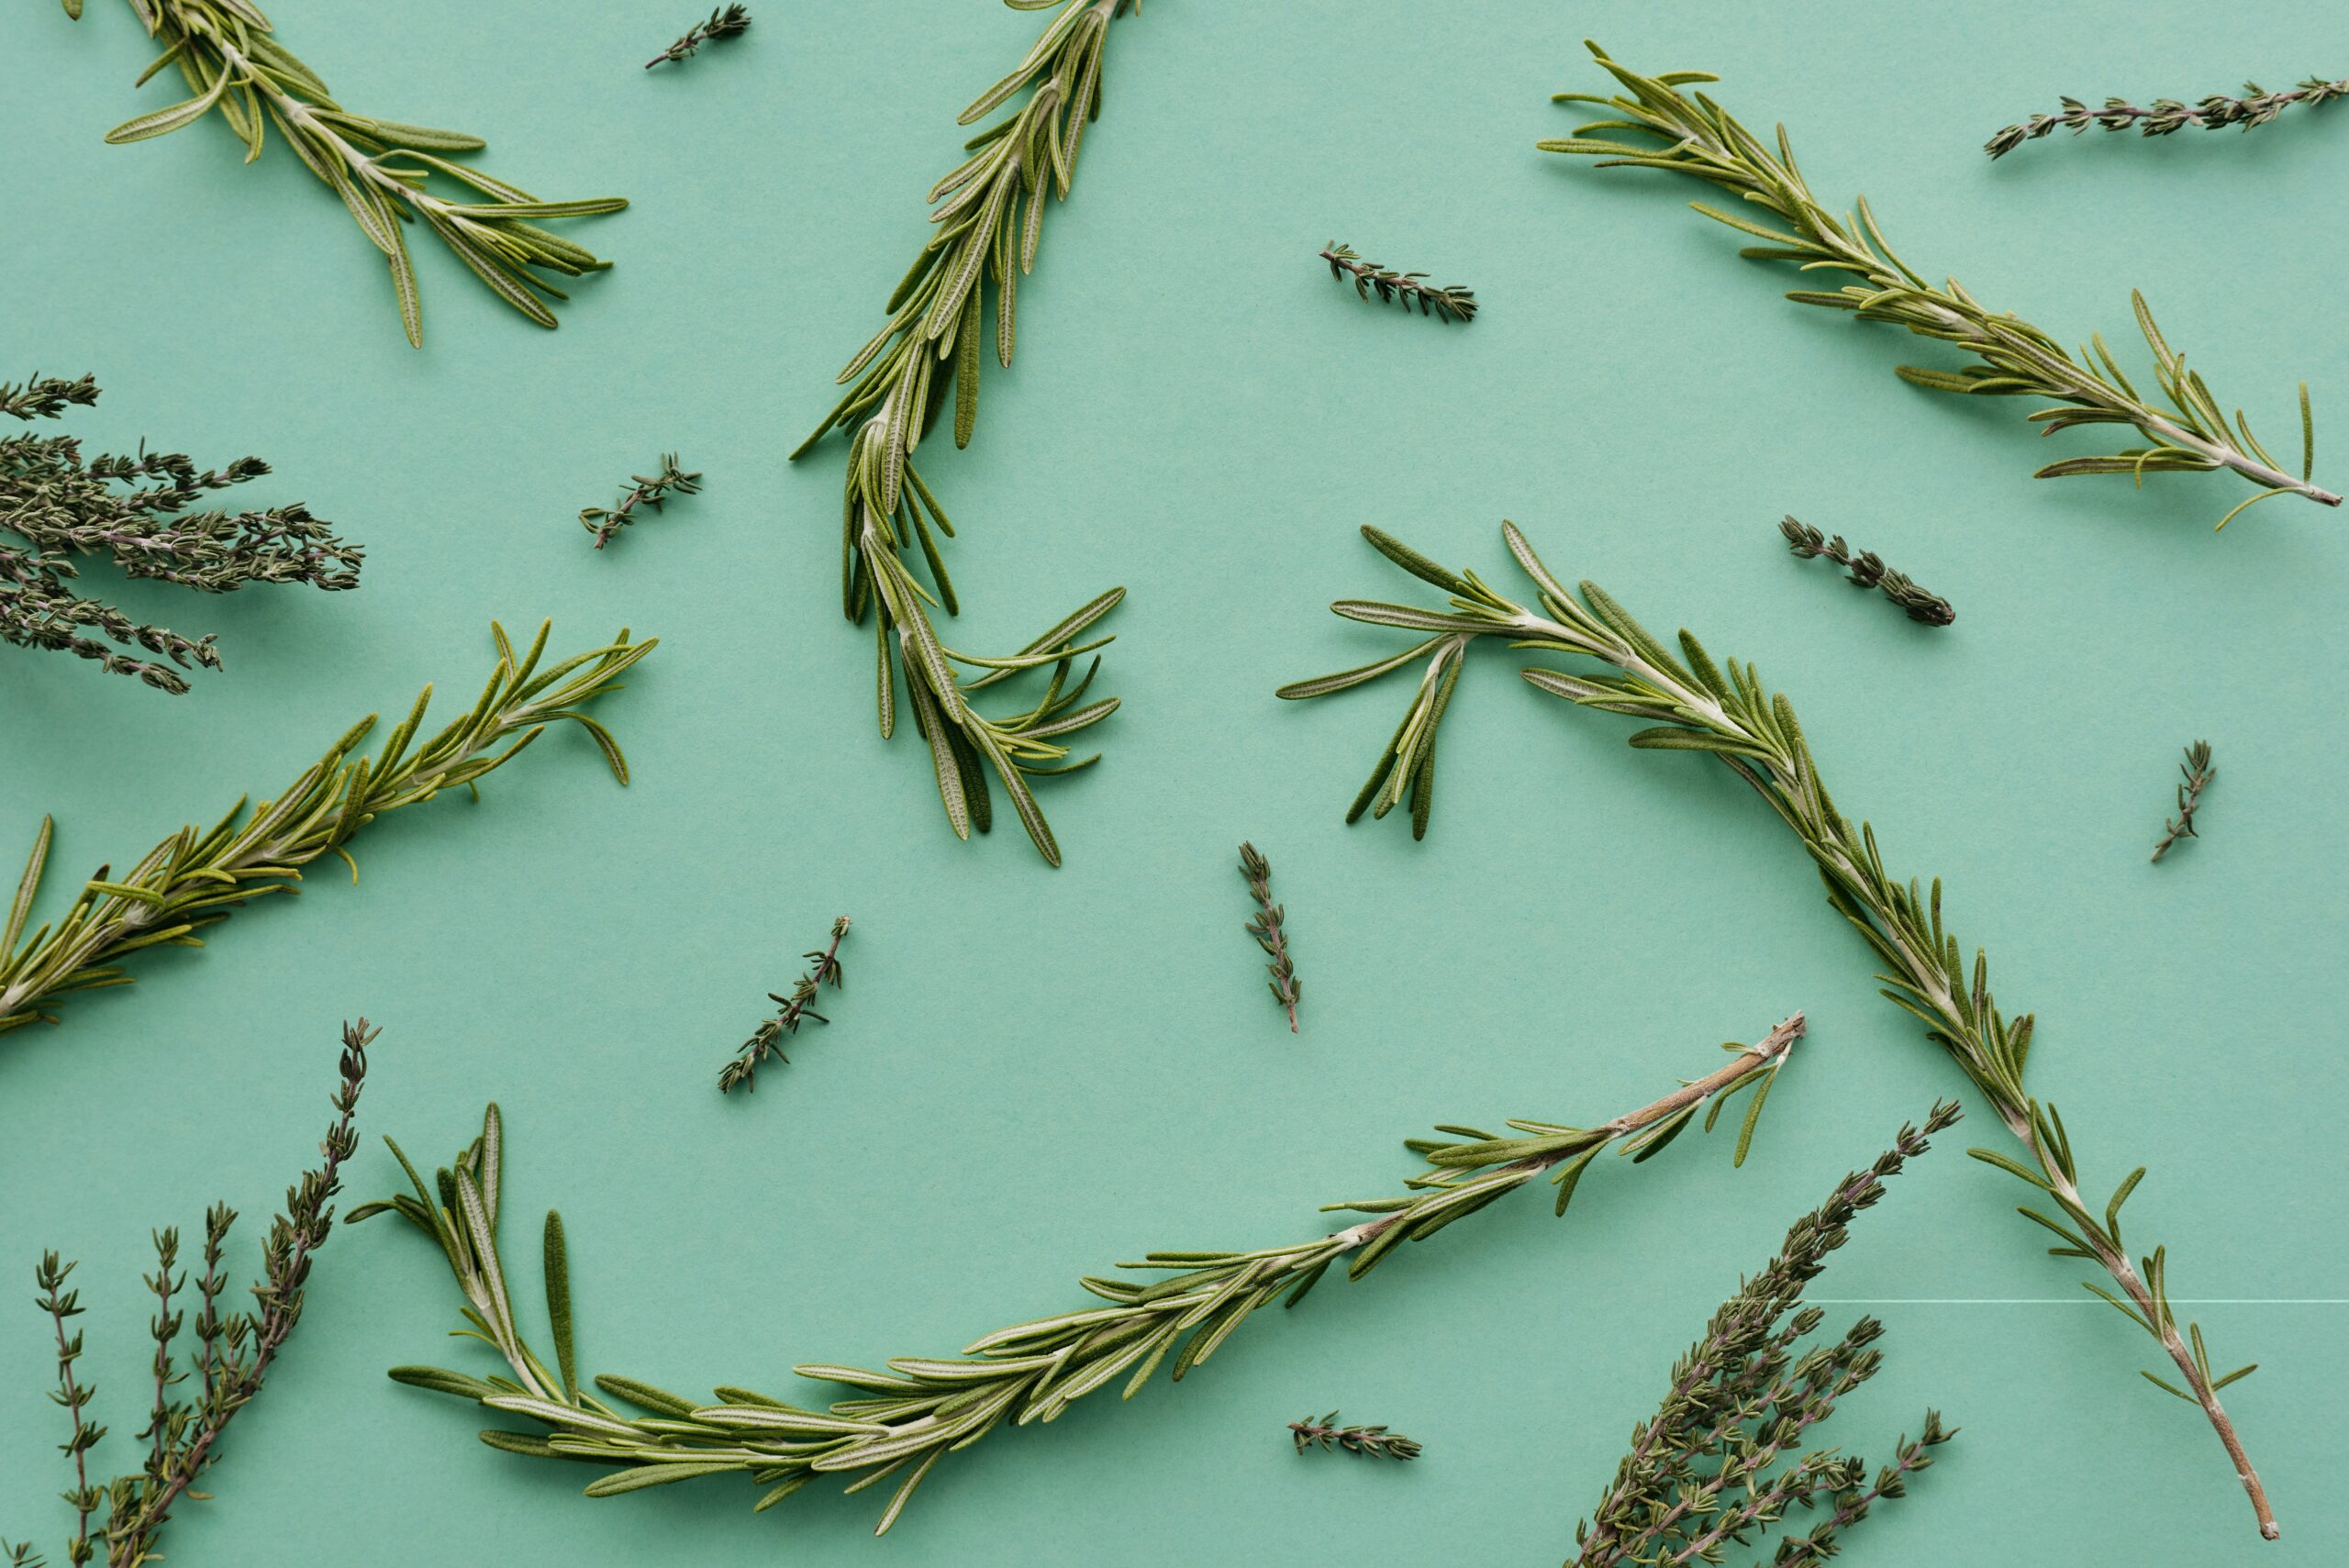 rosemary for protection